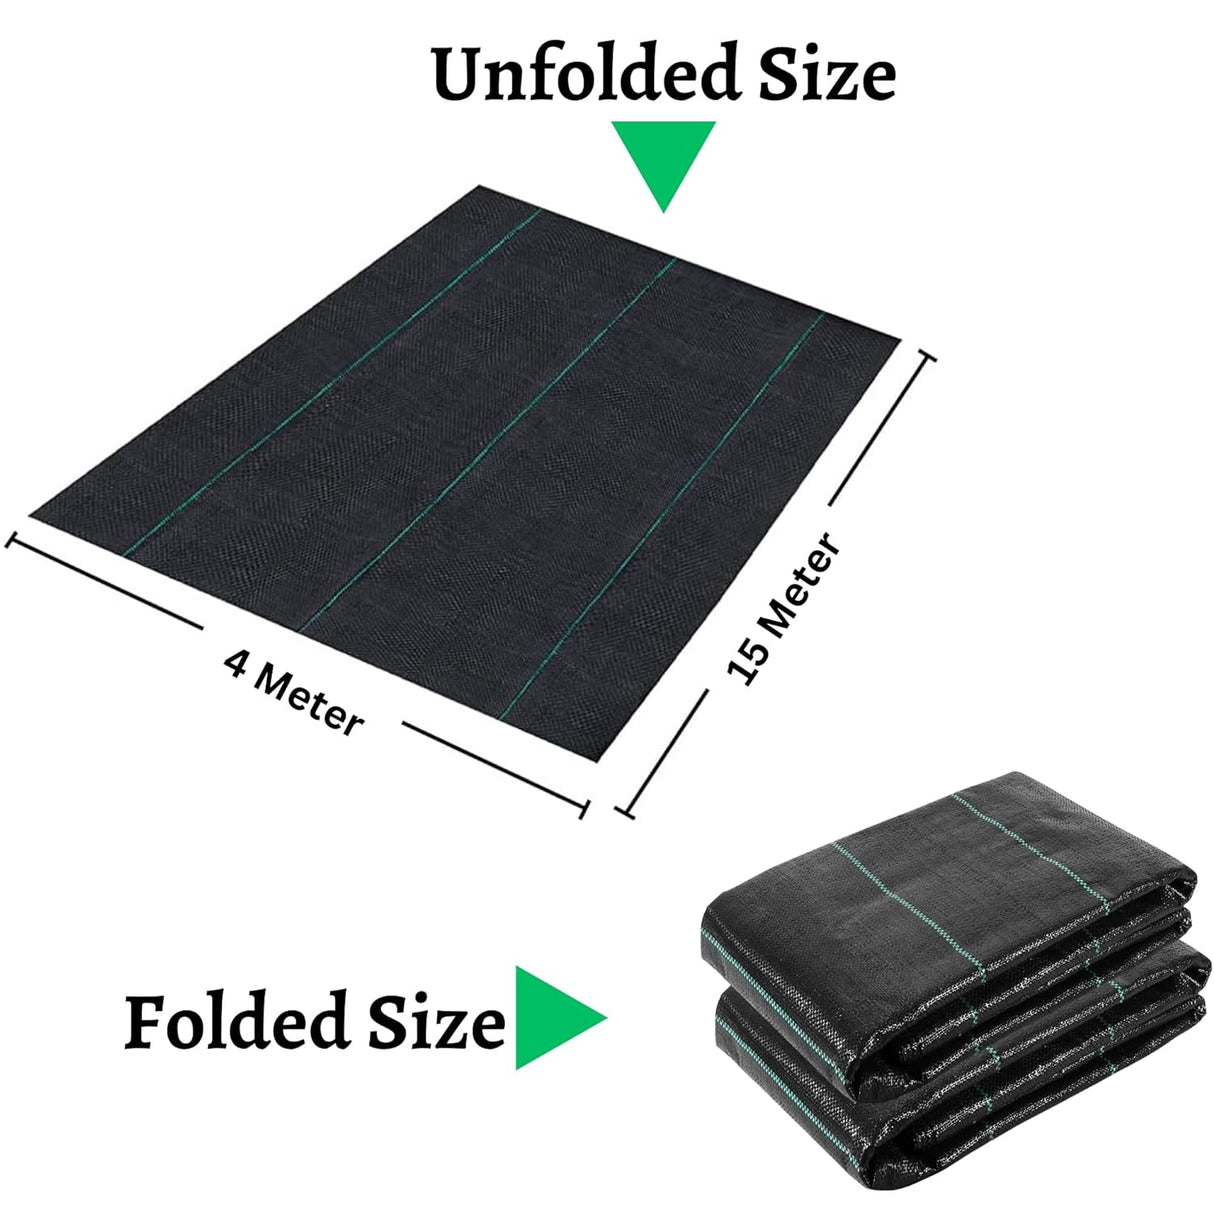 Singhal Premium Garden Weed Control Barrier Sheet Mat 4 Meter x 15 Meter, Landscape Fabric 110 GSM Heavy Duty Gardening Mat for Gardens, Agriculture, Outdoor Projects (Black)